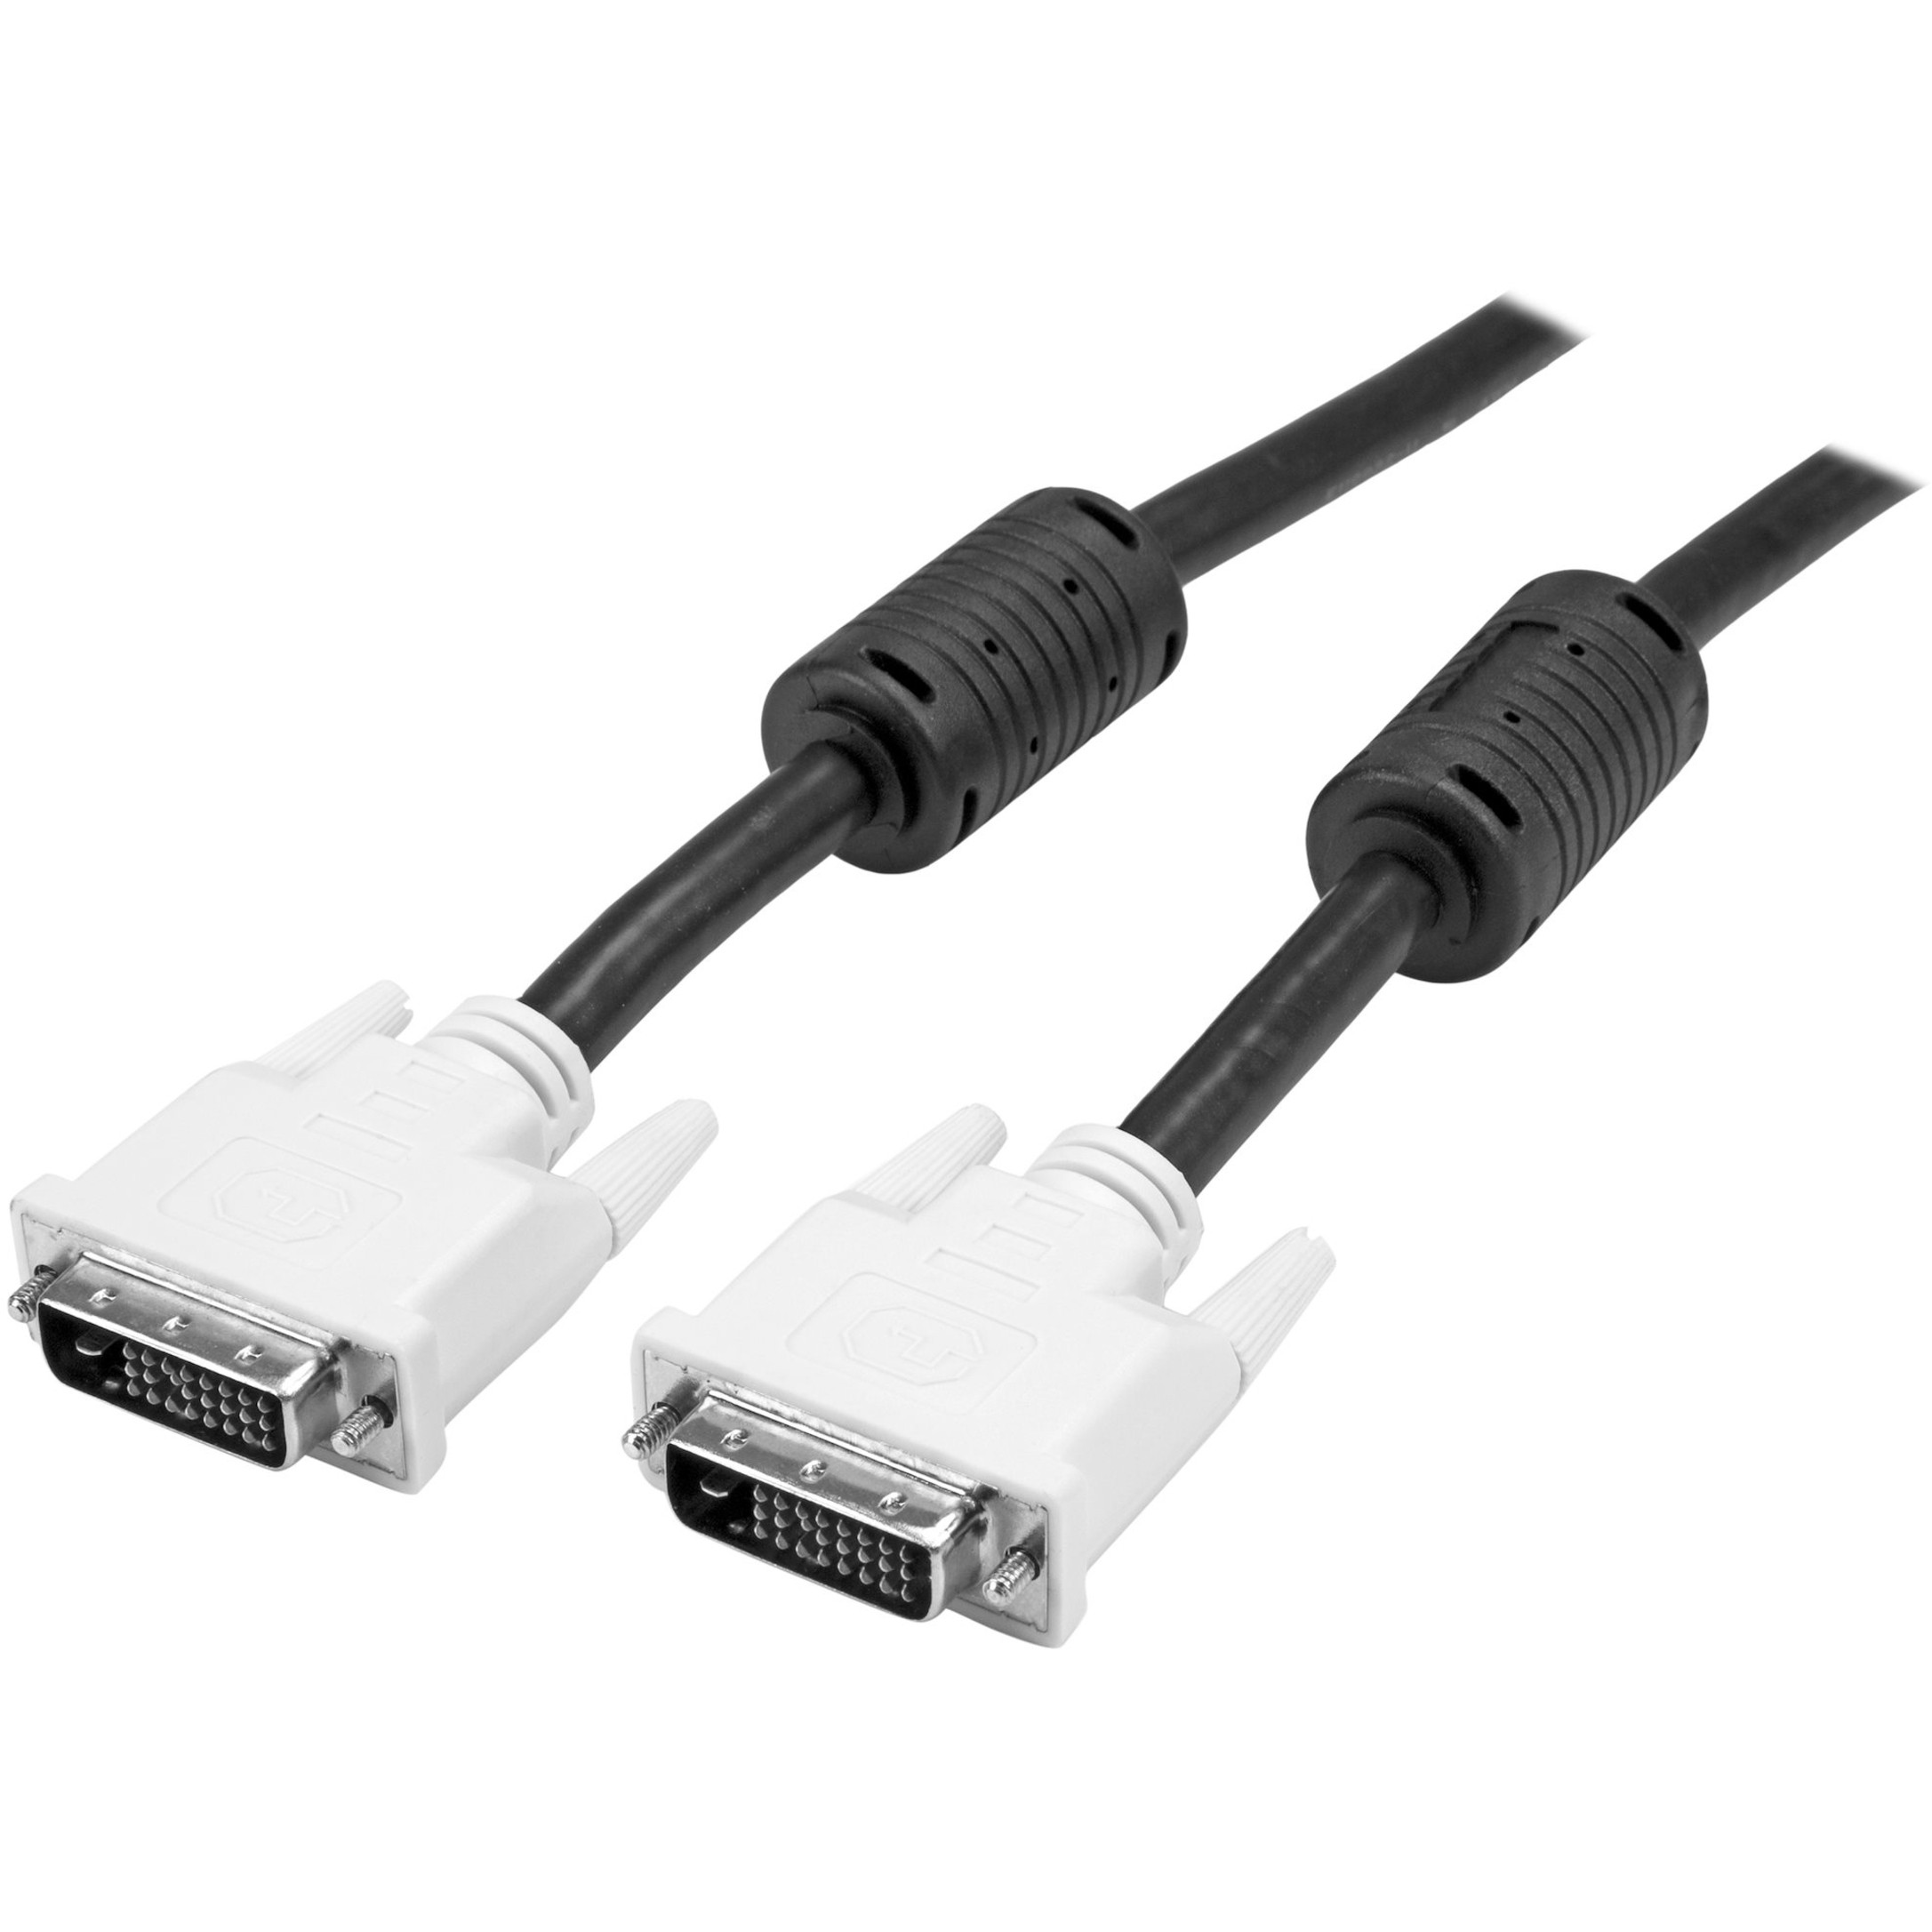 Startech .com 40 ft DVI-D Dual Link CableM/MProvides a high-speed, crystal-clear connection to your DVI digital devices, with a long 40-f… DVIDDMM40